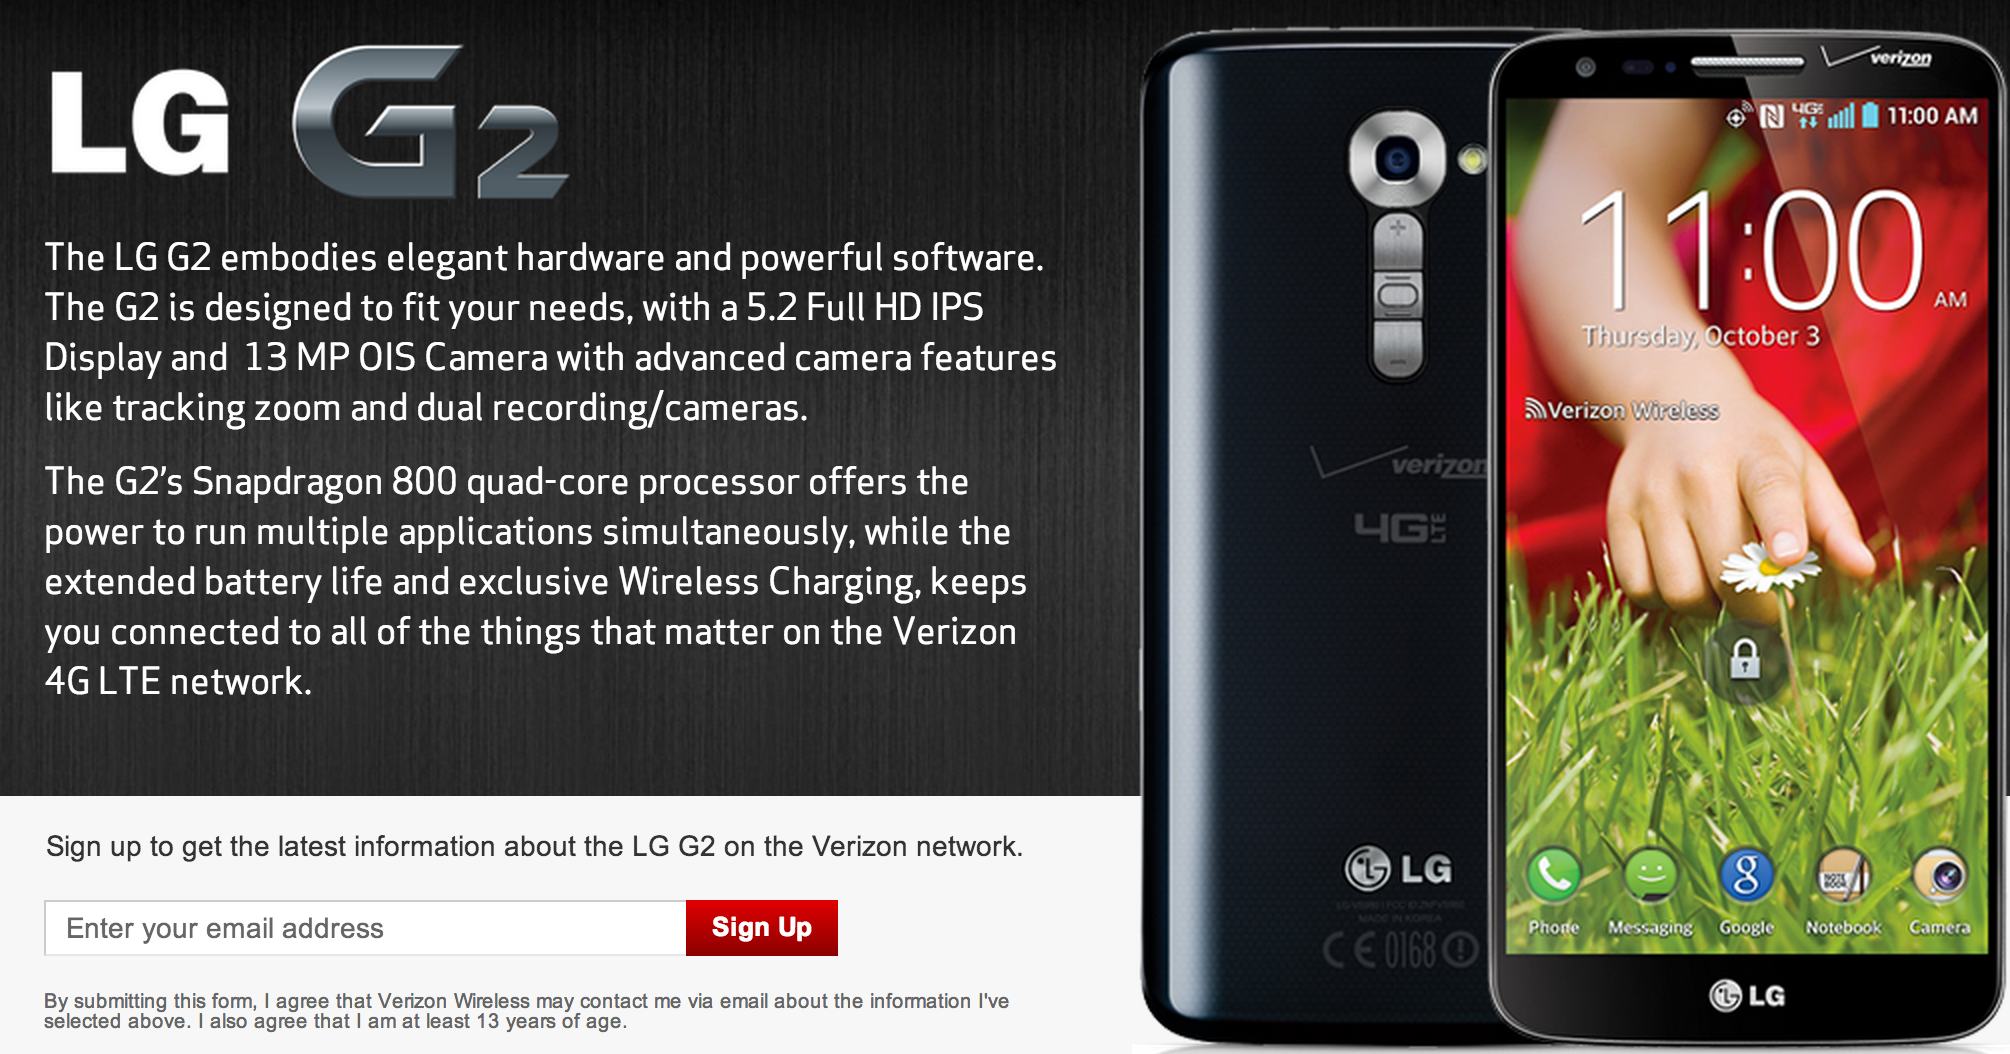 verizon sign up page for the lg g2 confirms qi wireless charging exclusivity image 2